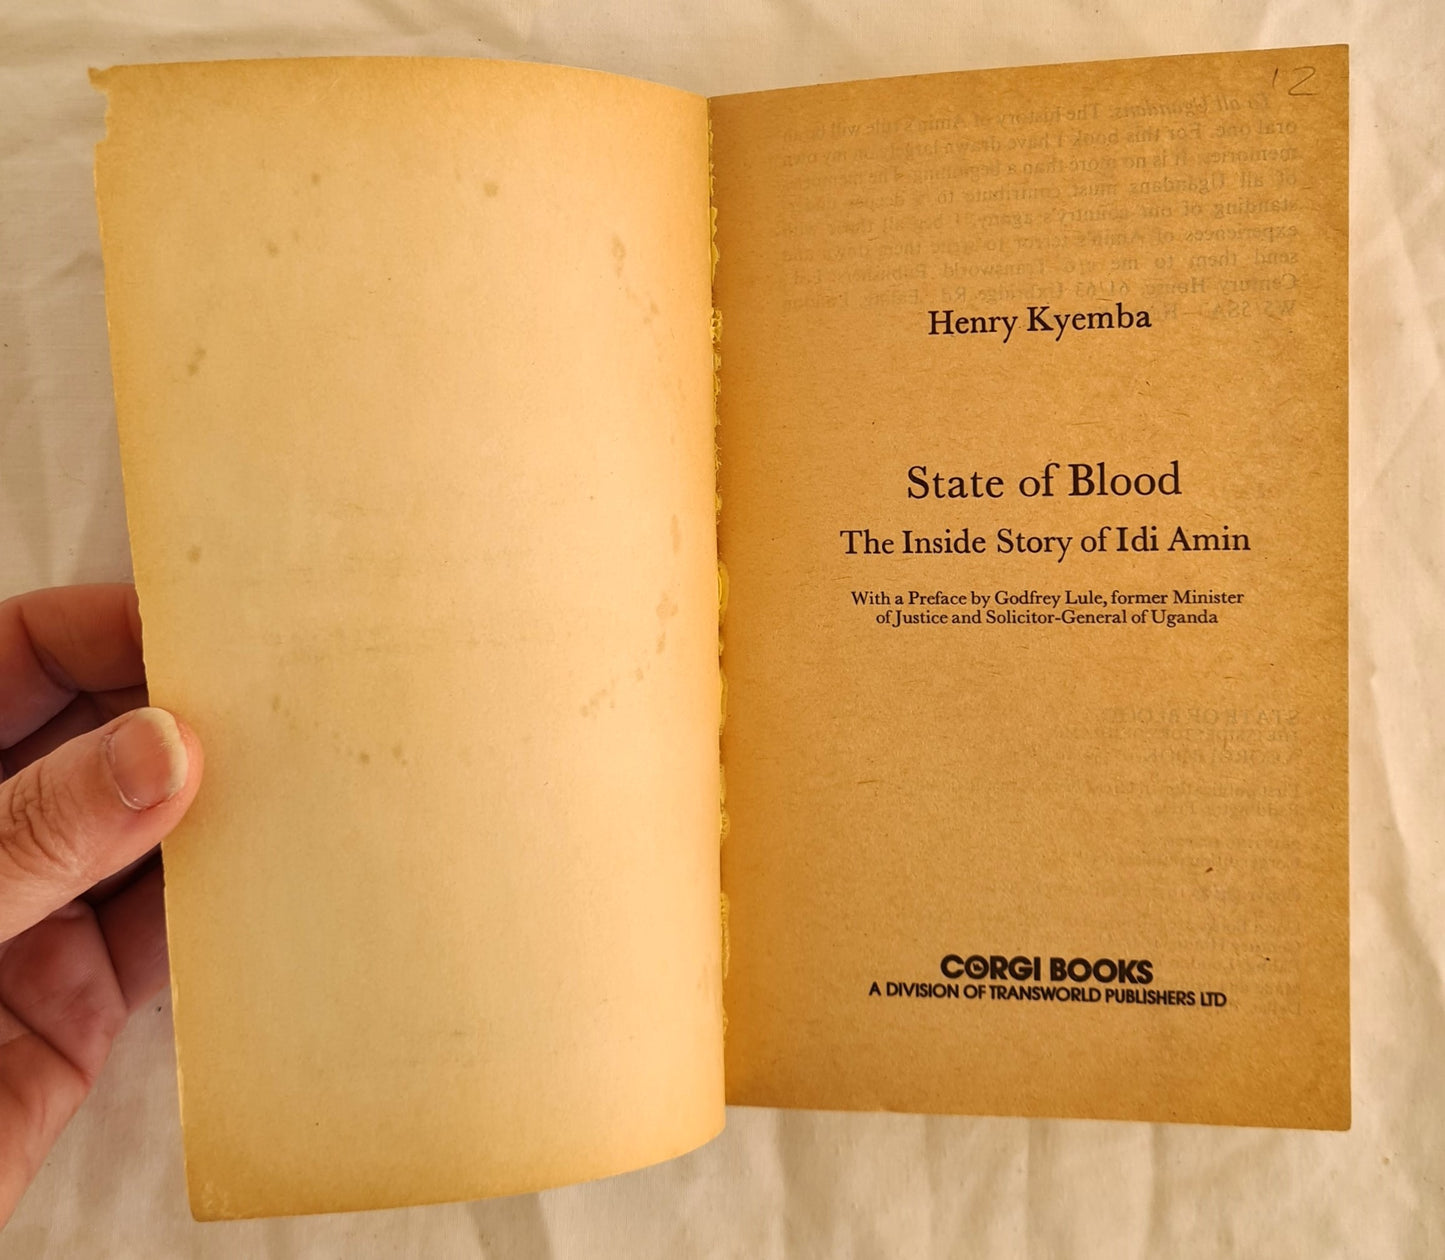 State of Blood by Henry Kyemba